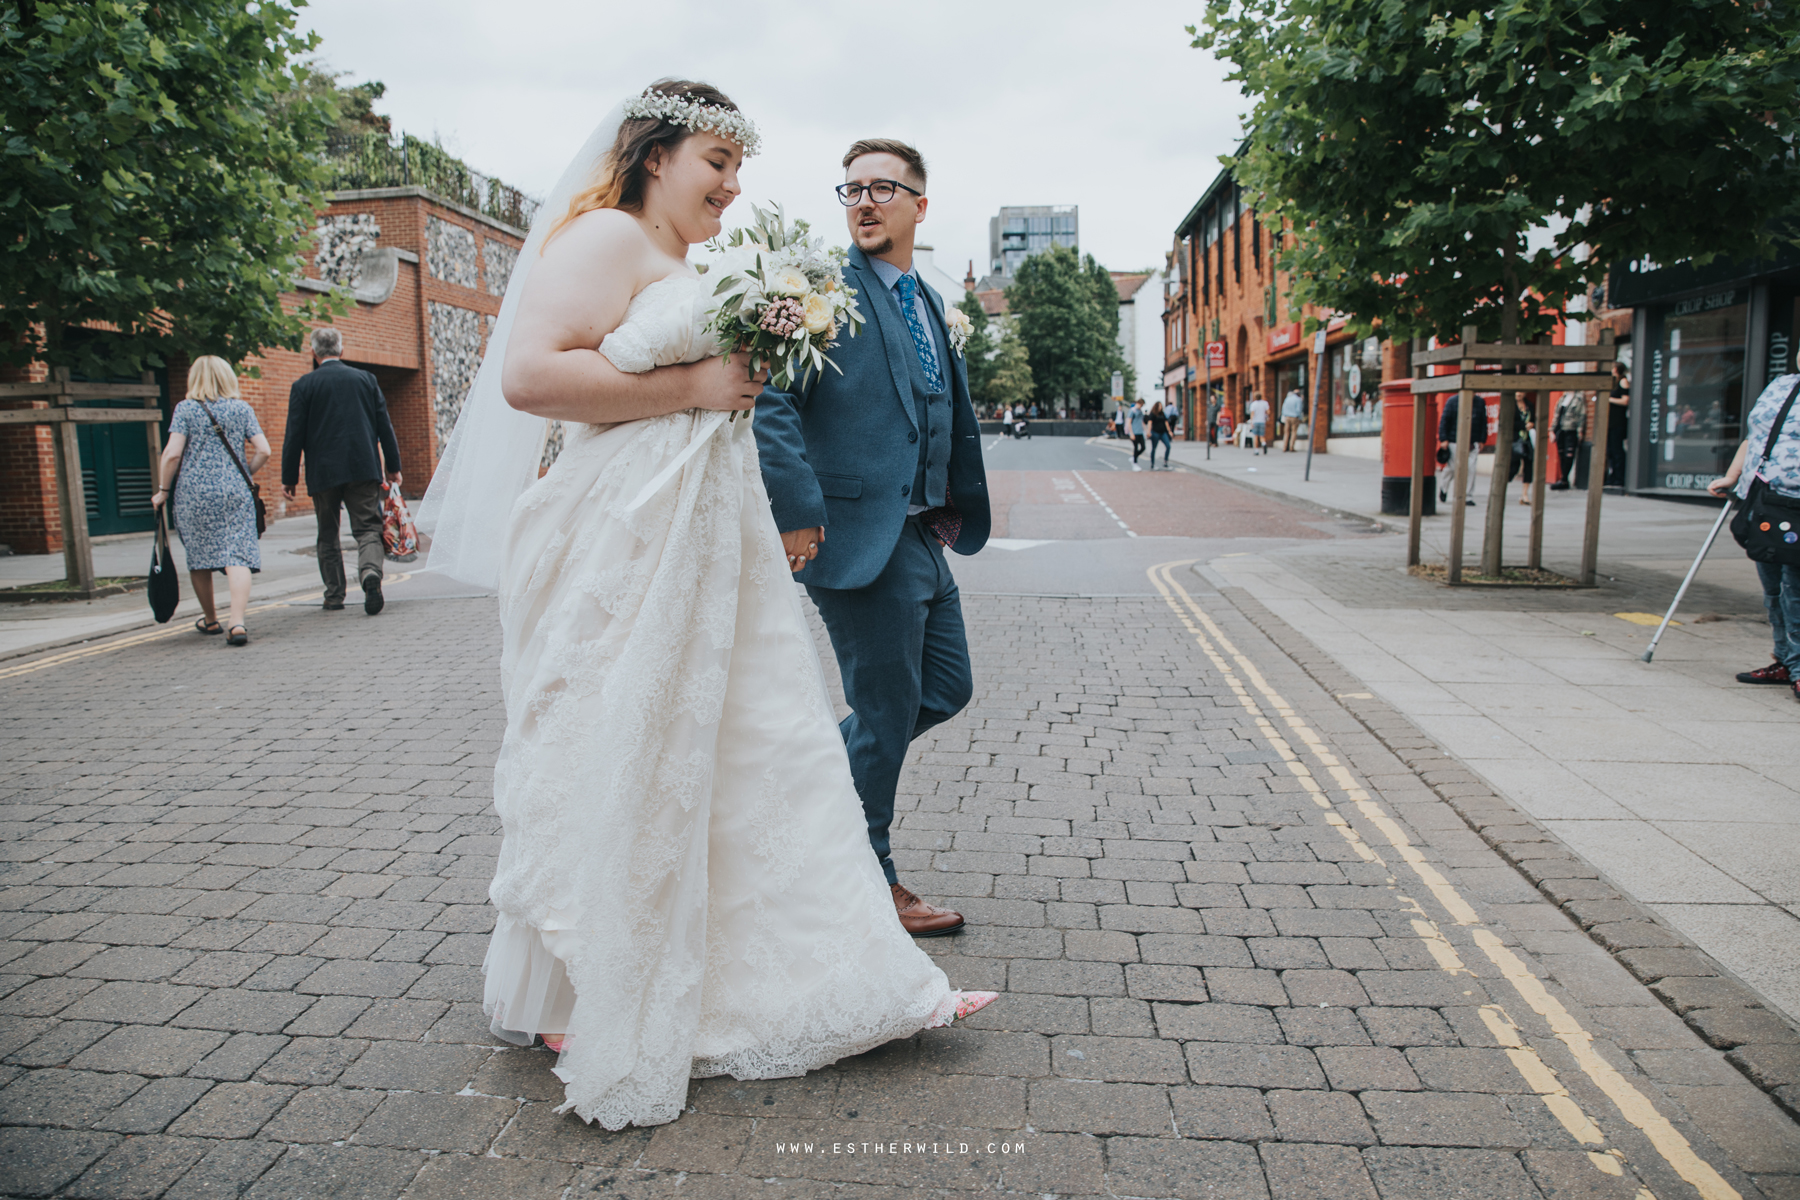 Norwich_Castle_Arcade_Grosvenor_Chip_Birdcage_Cathedral_Cloisters_Refectory_Wedding_Photography_Esther_Wild_Photographer_Norfolk_Kings_Lynn_3R8A1245.jpg